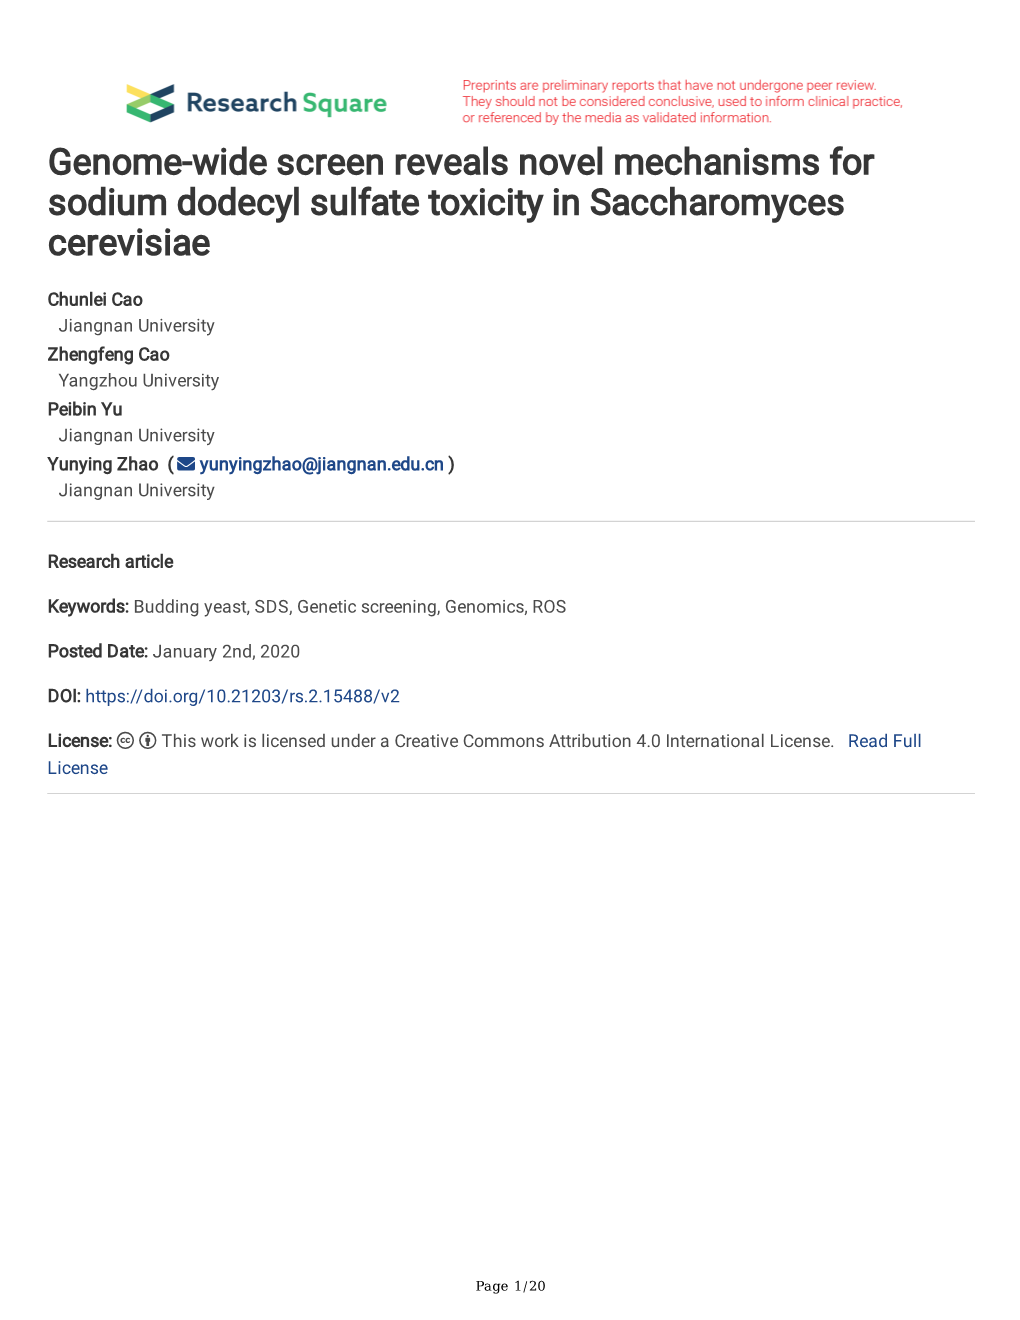 Genome-Wide Screen Reveals Novel Mechanisms for Sodium Dodecyl Sulfate Toxicity in Saccharomyces Cerevisiae